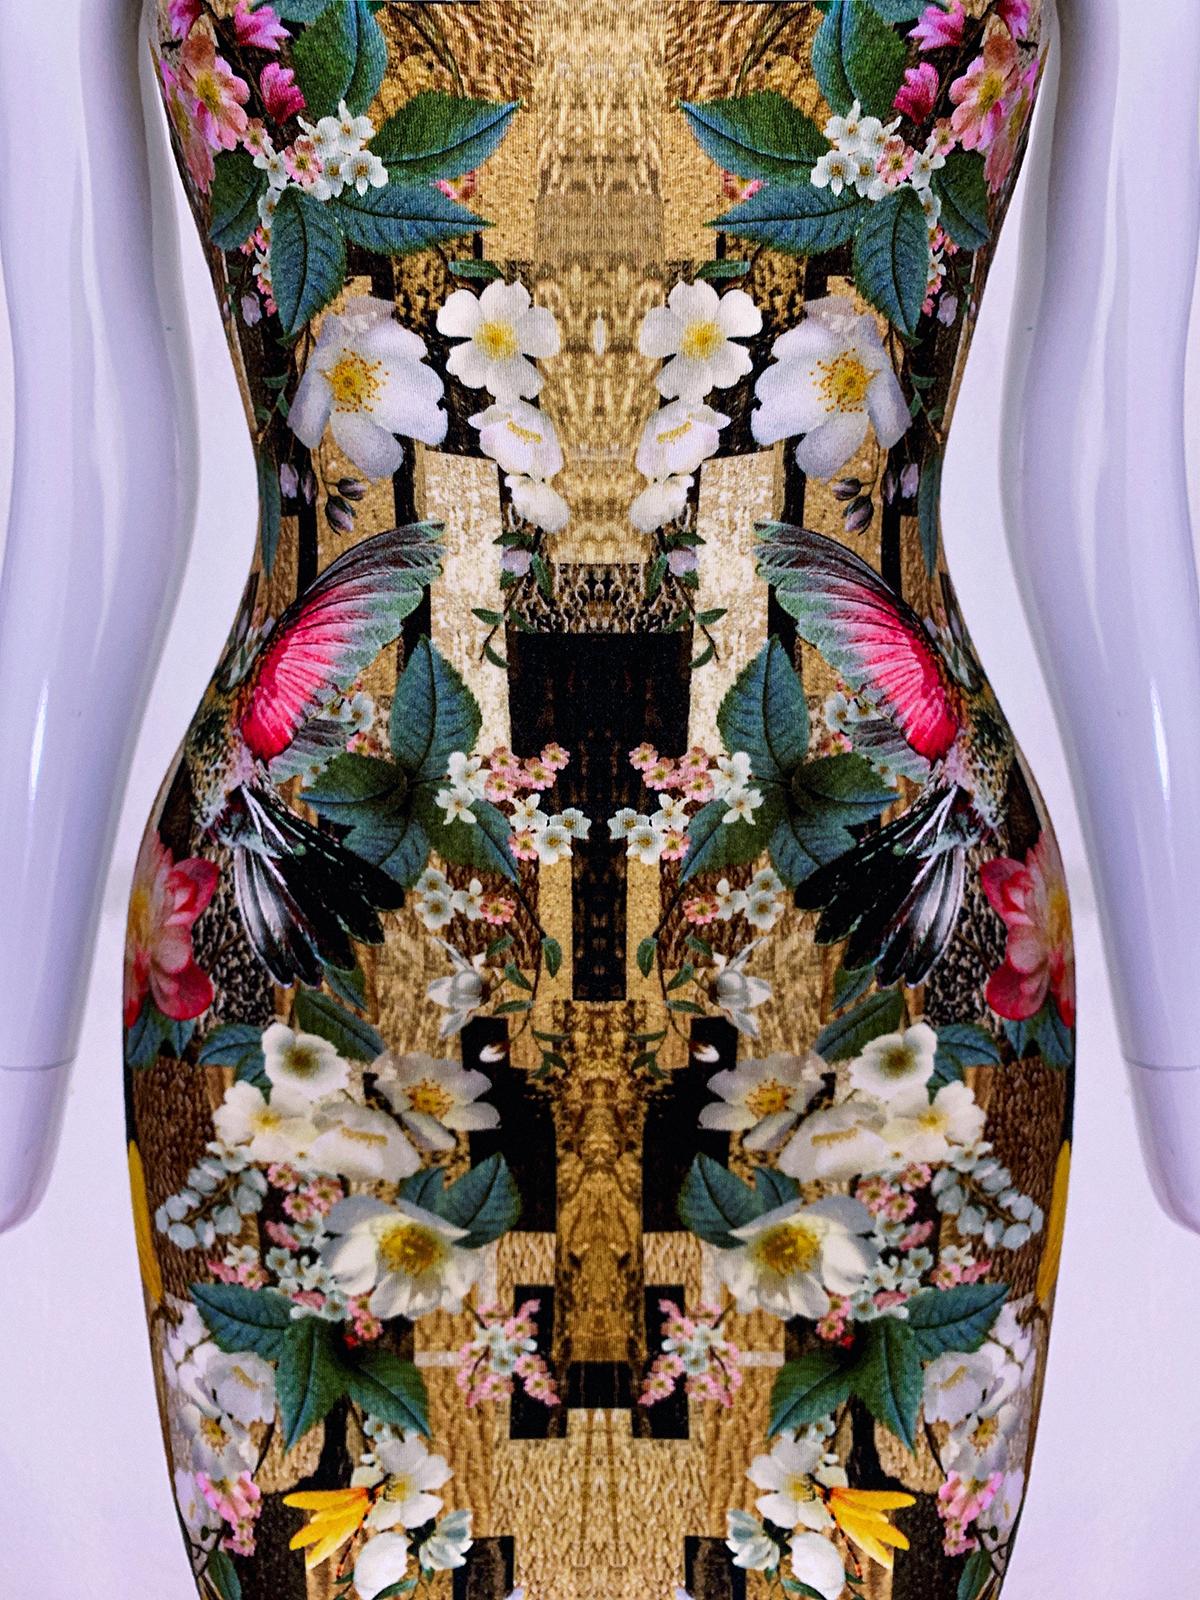 Gorgeous Alexander McQueen fitted dress with beautiful kaleidoscope print featuring hummingbirds, dragonflies and flowers.
Gold tones background, beautiful construction.


Alexander McQueen
Made in Italy
marked size 42

ALEXANDER McQUEEN

British